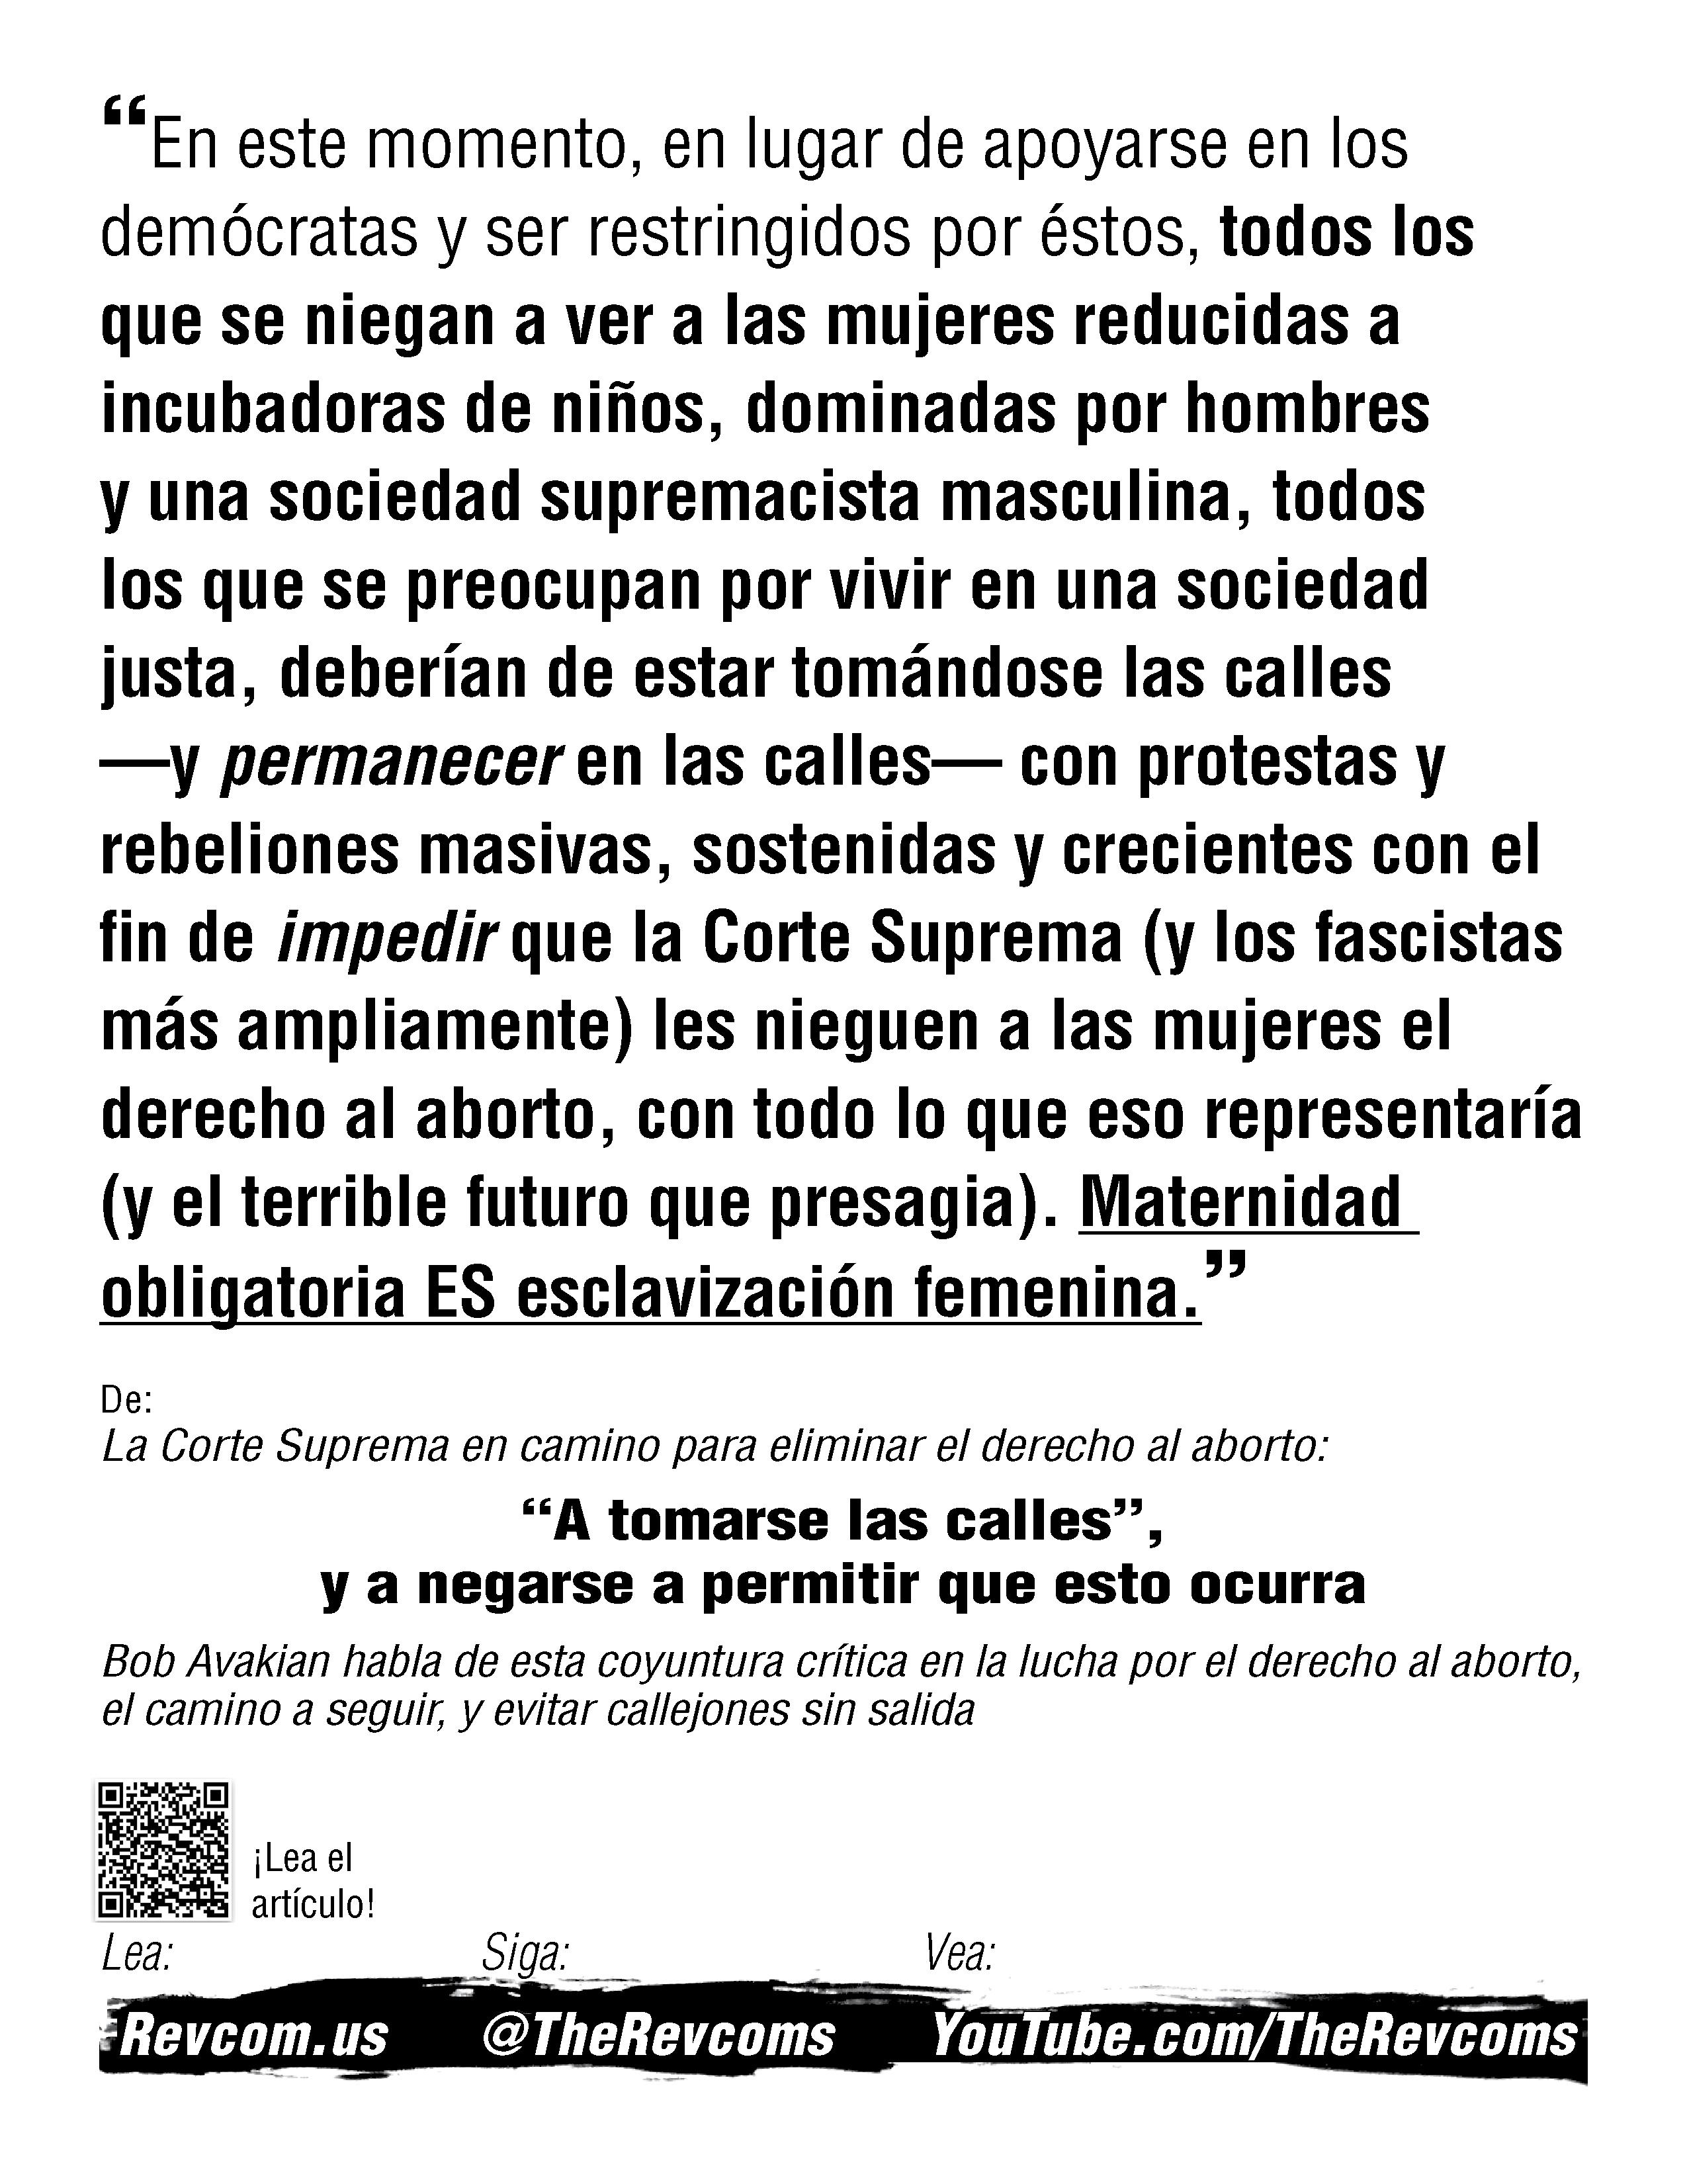 leaflet 4 quotes from BA  #2 spanish